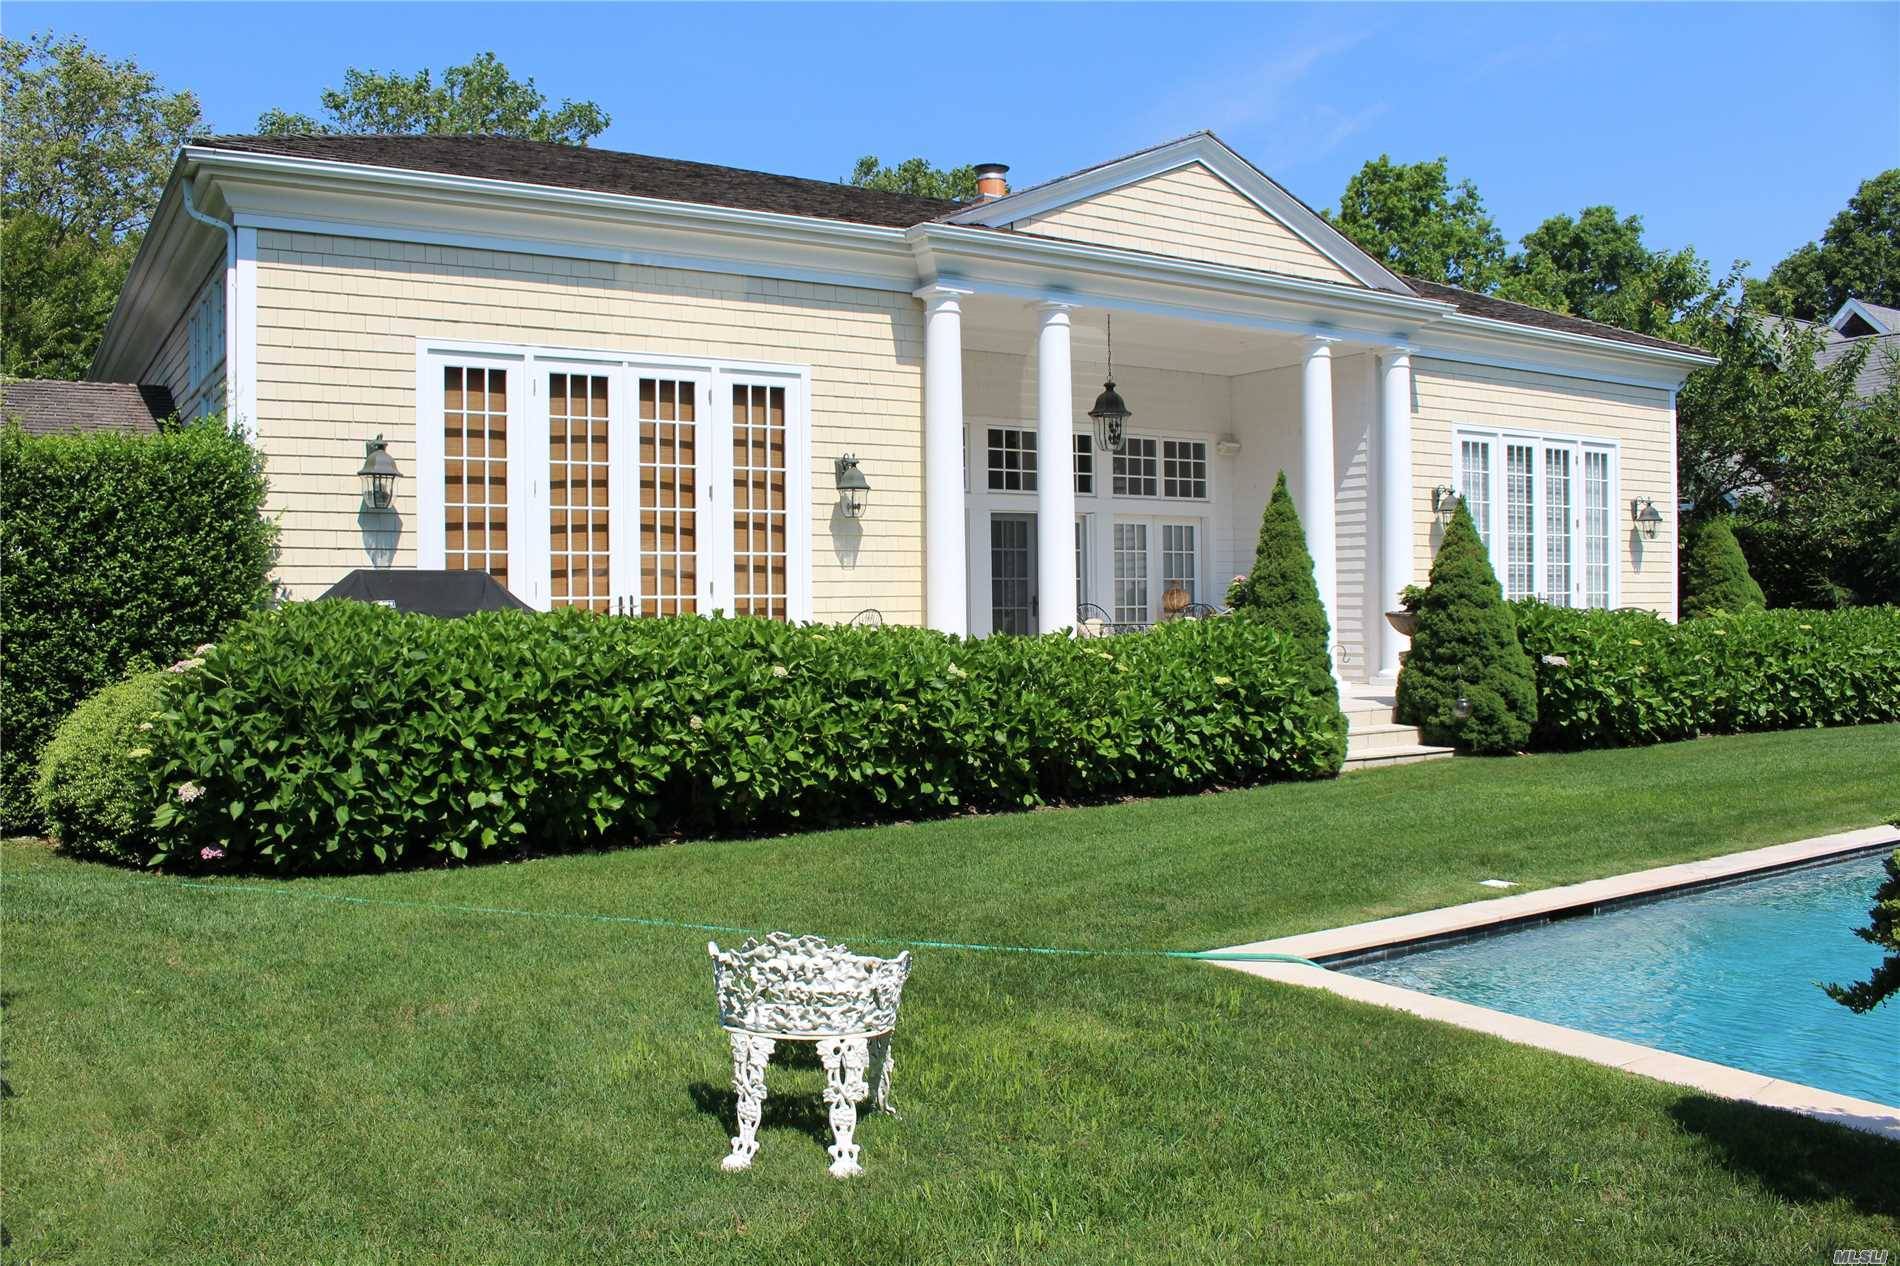 Formal Gardens And Limestone Patios And A Heated Pool Surrounded With Matured Landscaping For Additional Privacy.